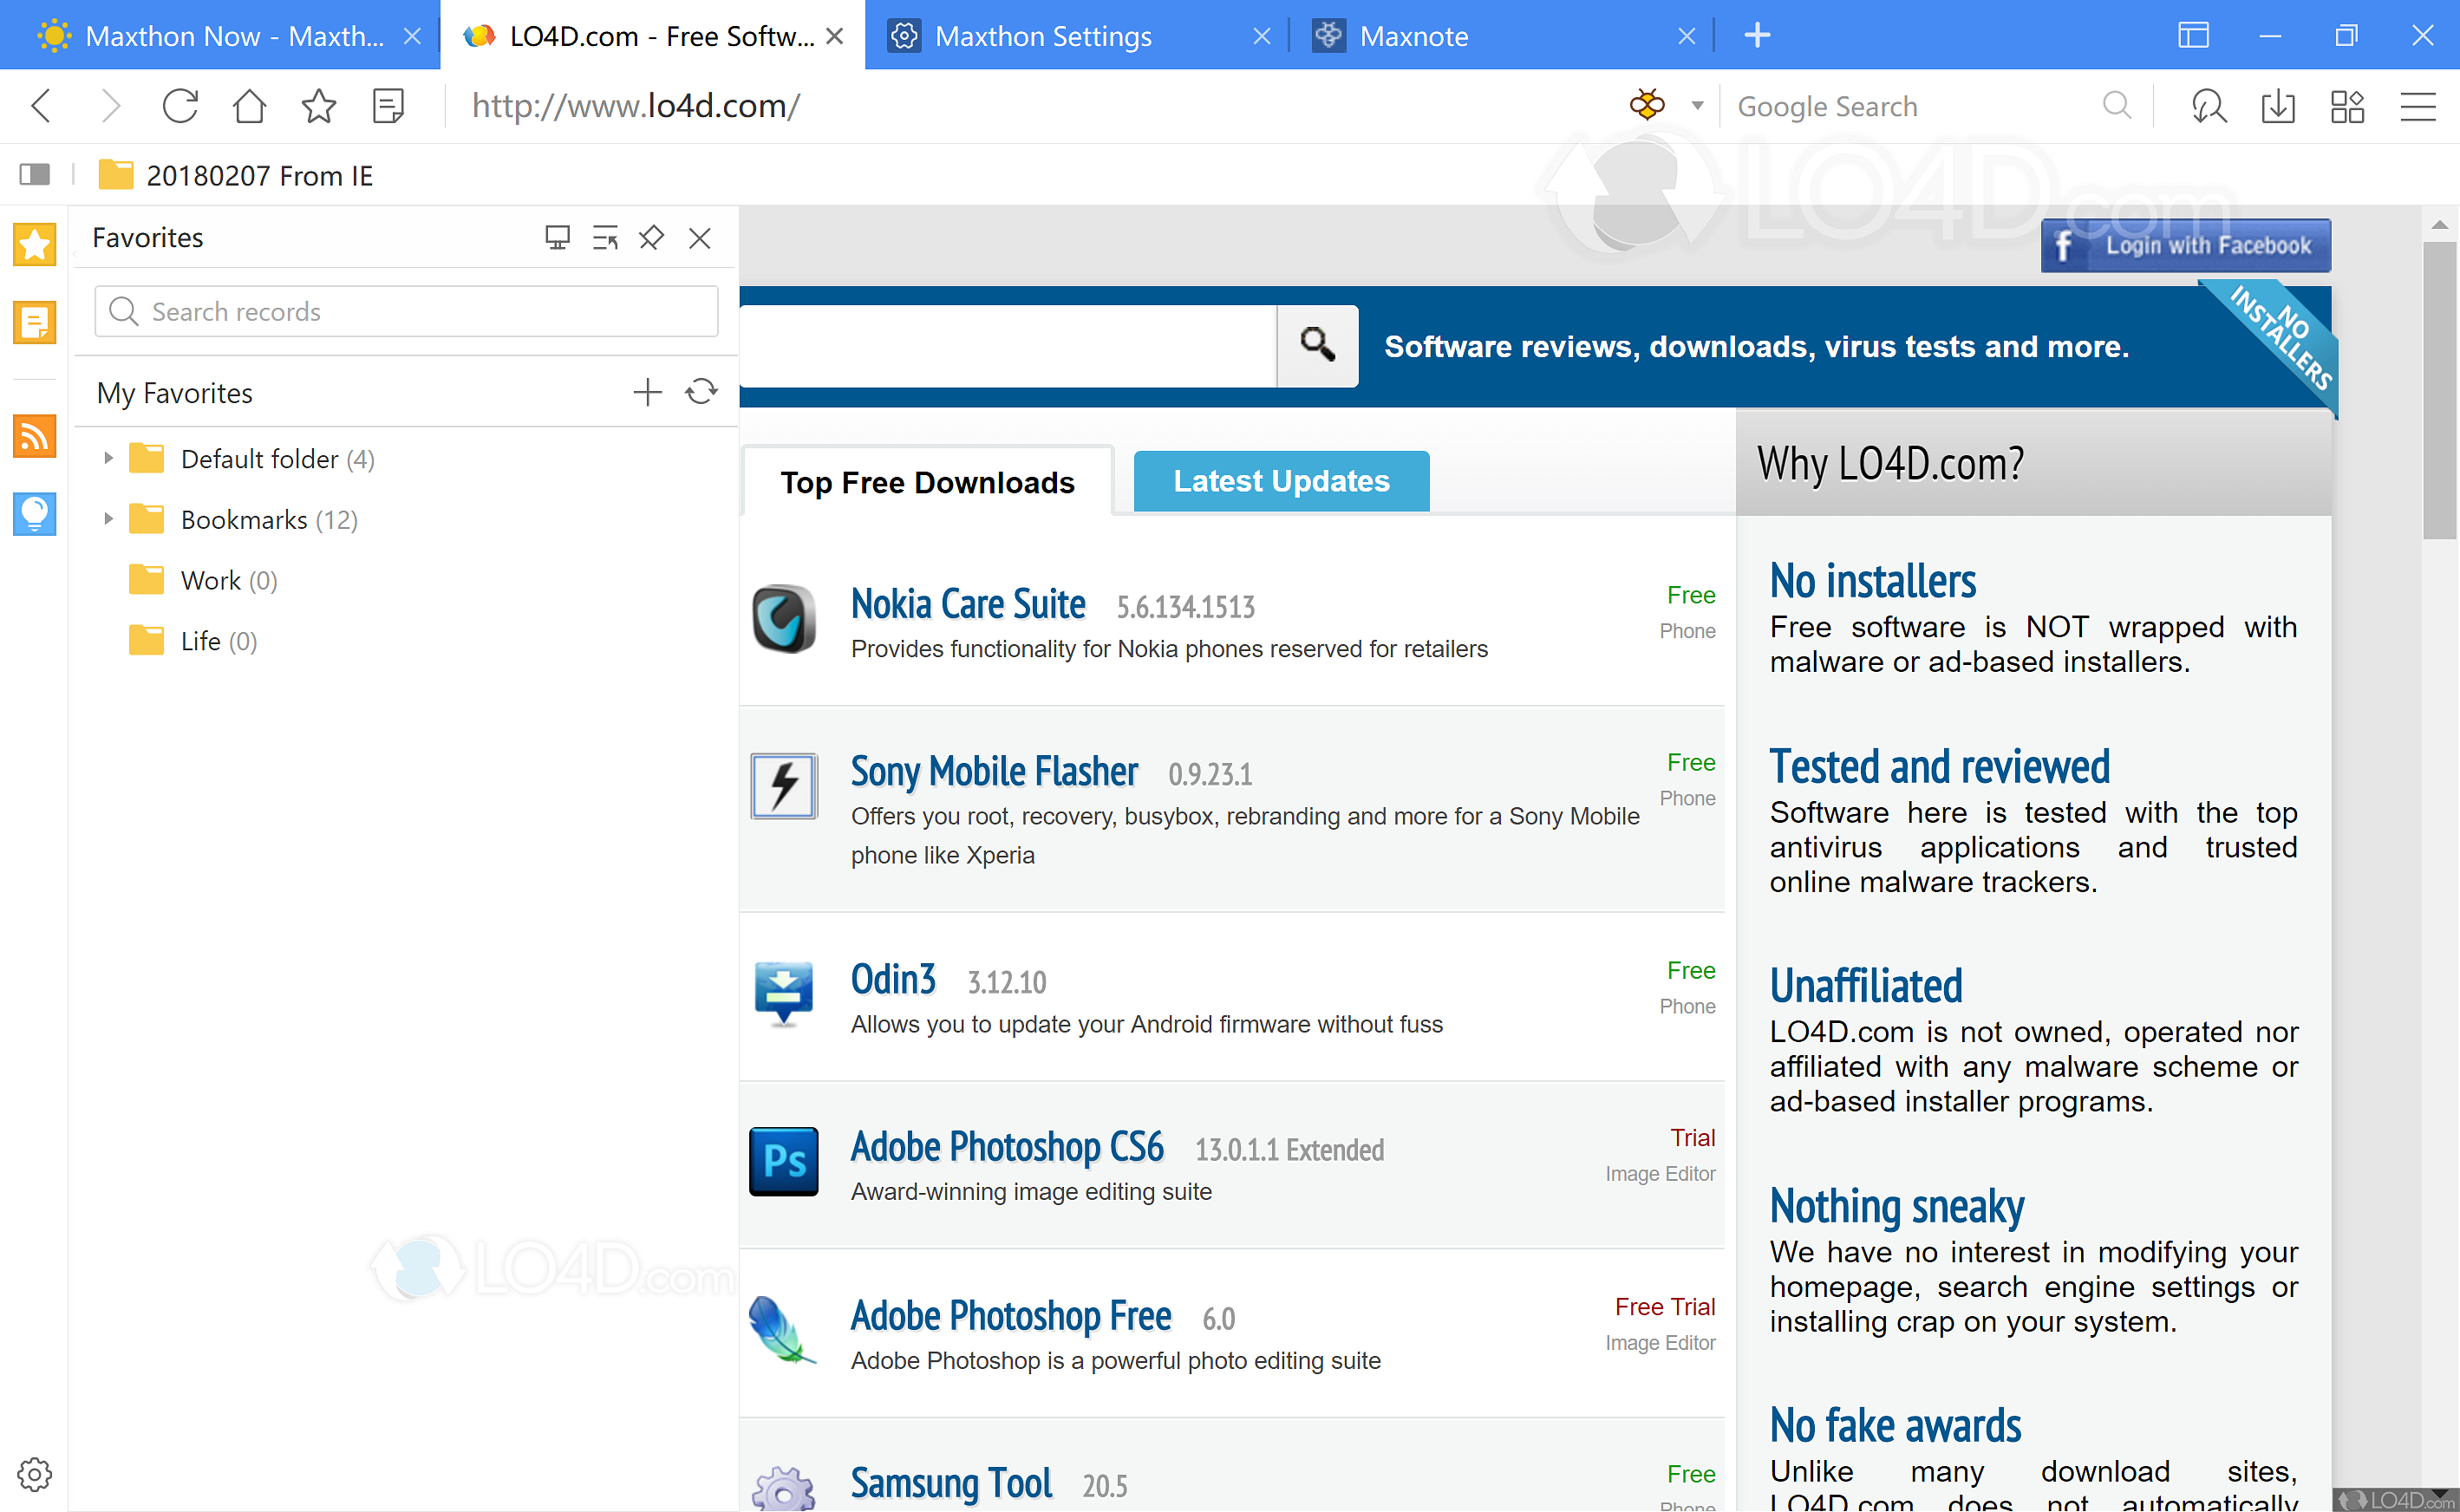 maxthon browser 3.0 download